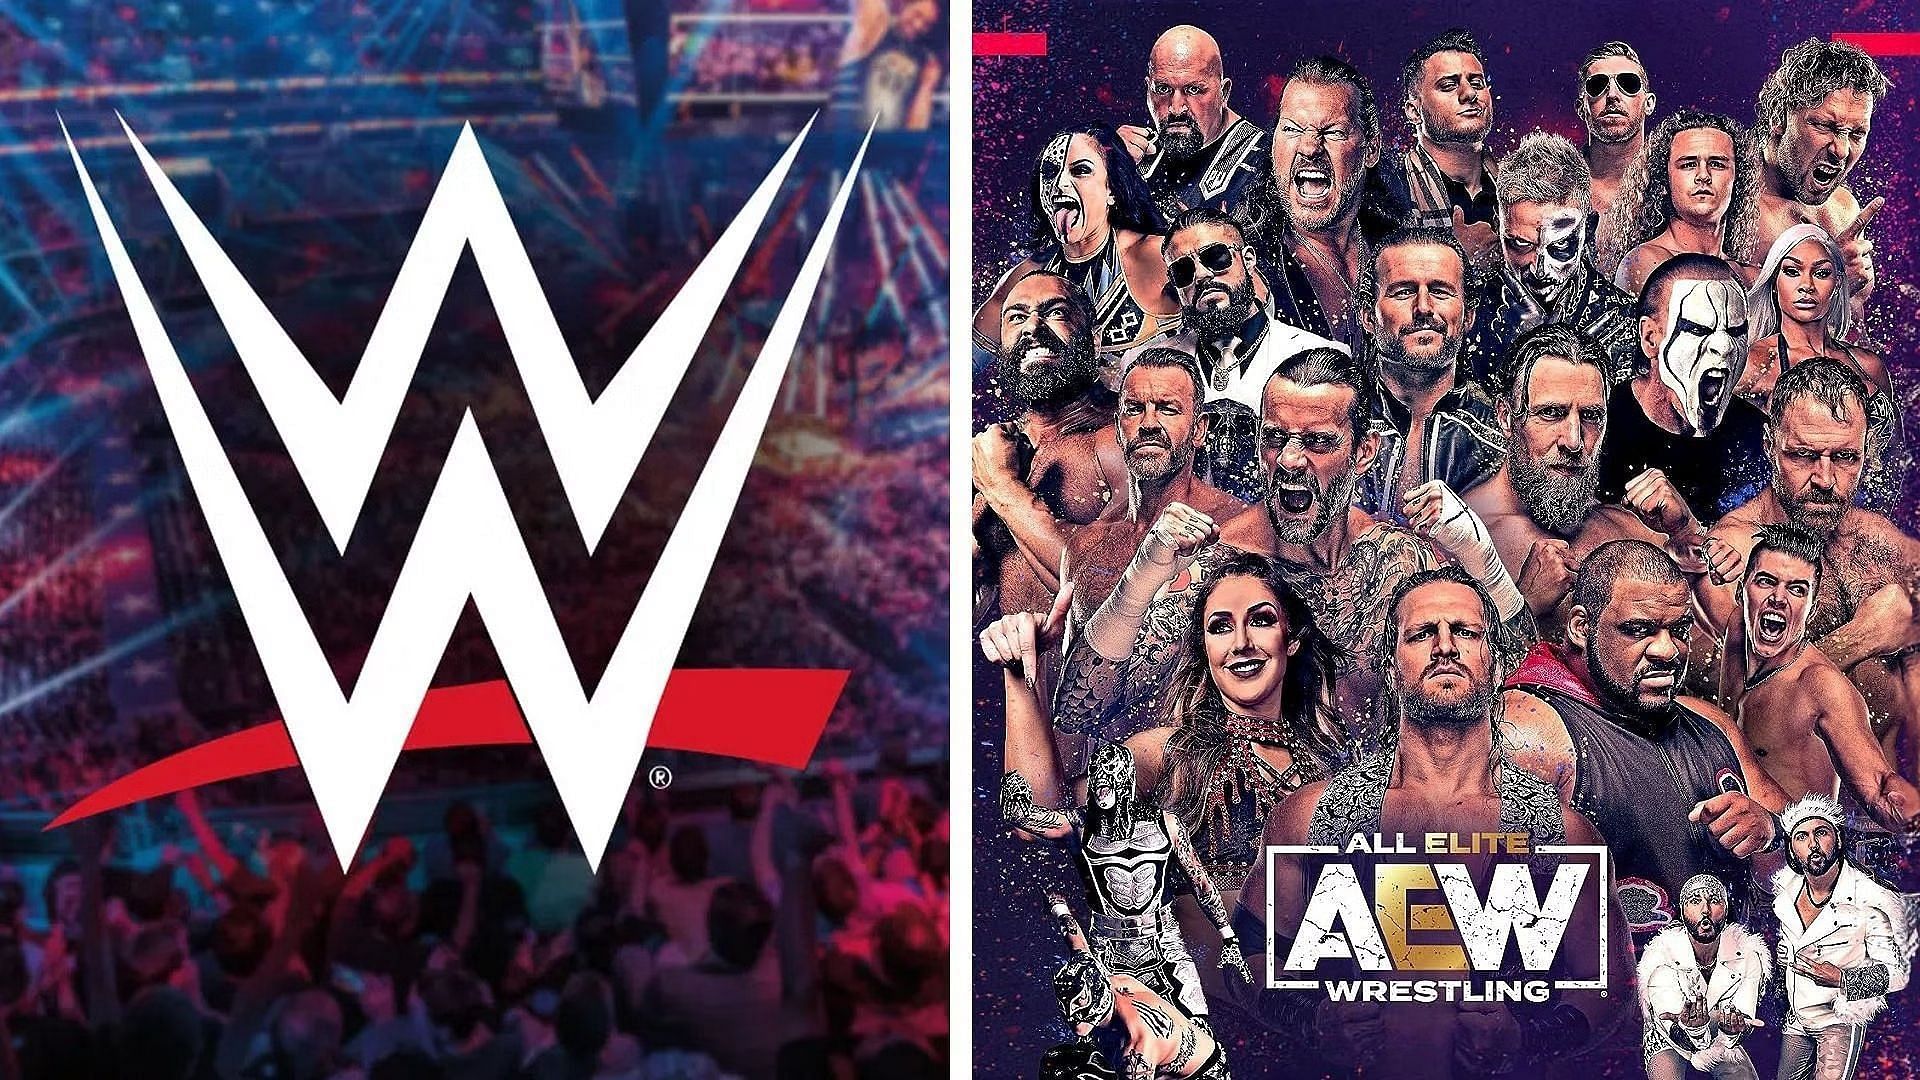 Which AEW star would you like to see in WWE?